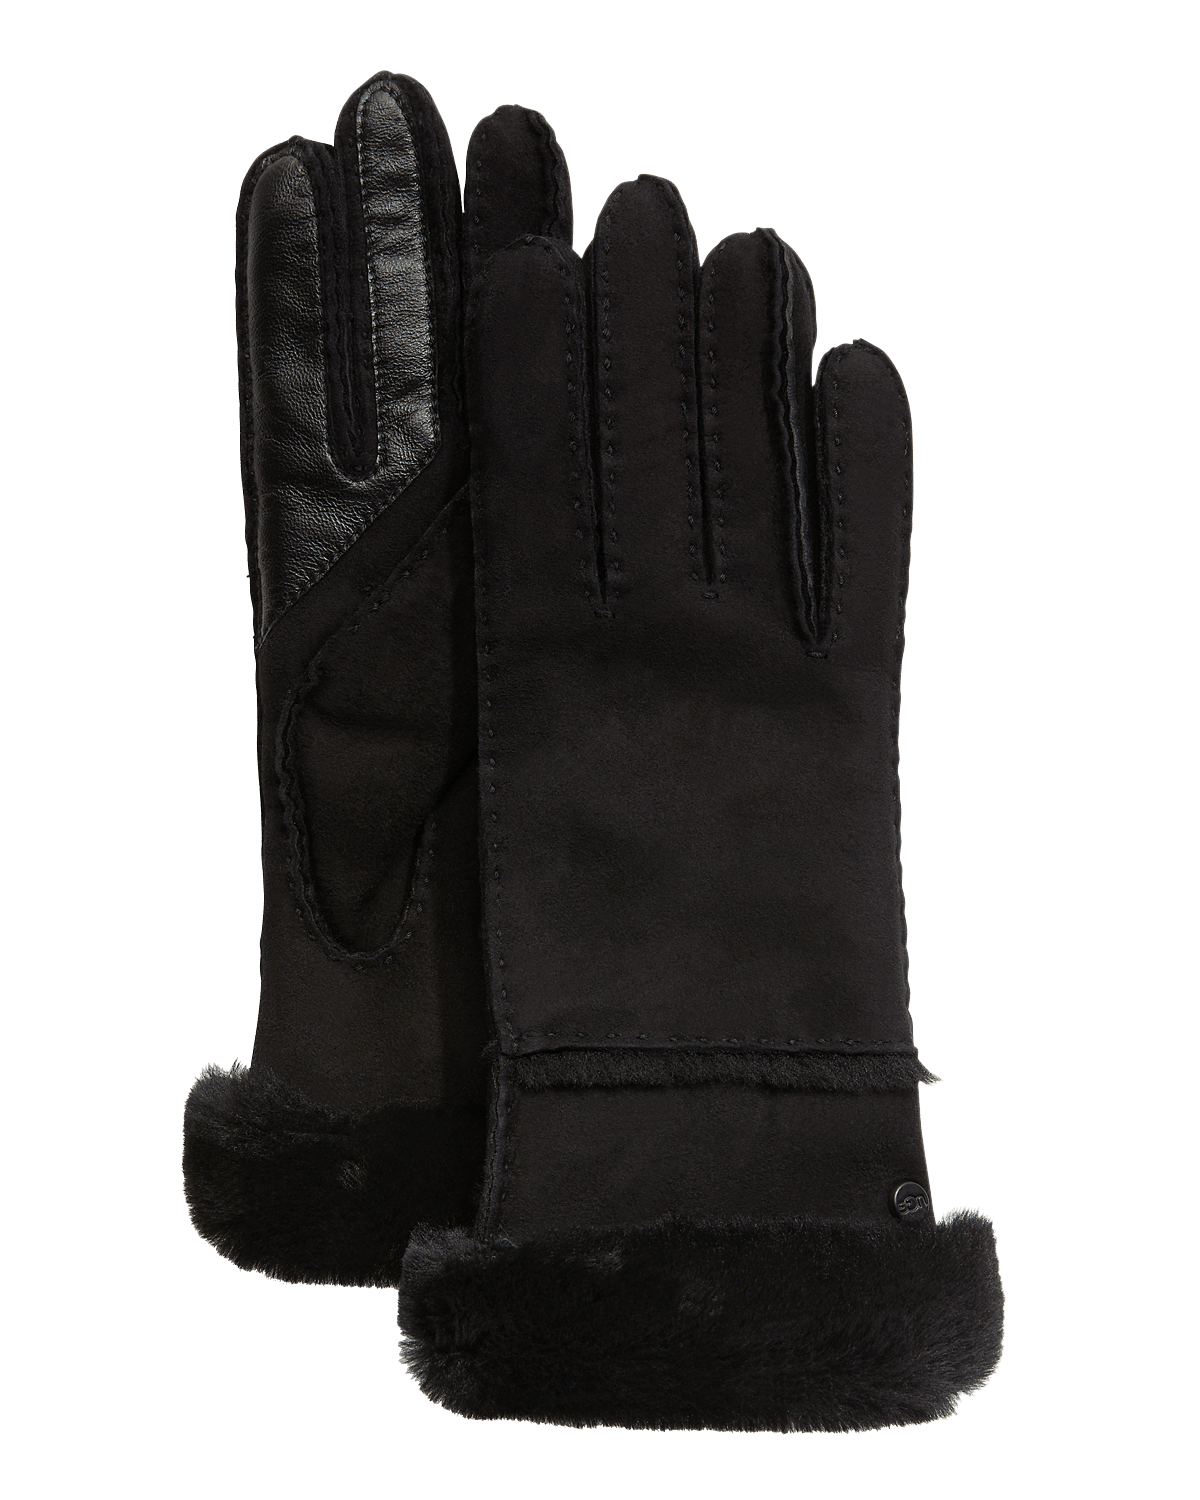 Agnelle Leather Gloves Shearling Cuff | Neiman Marcus